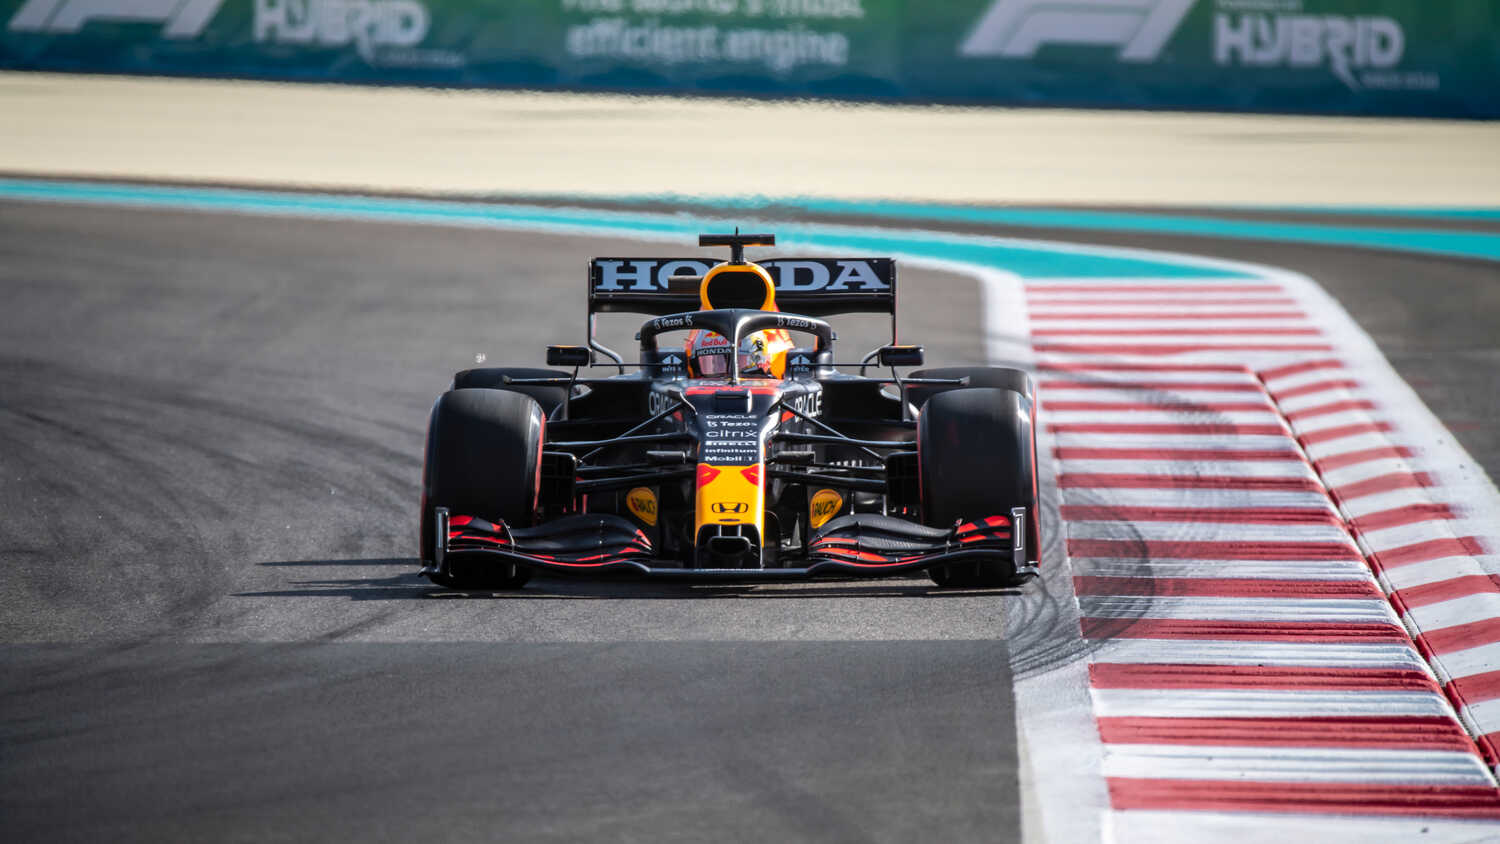 Formula 1 2021 Abu Dhabi Grand Prix – Verstappen wins first world title in a hotly contested race